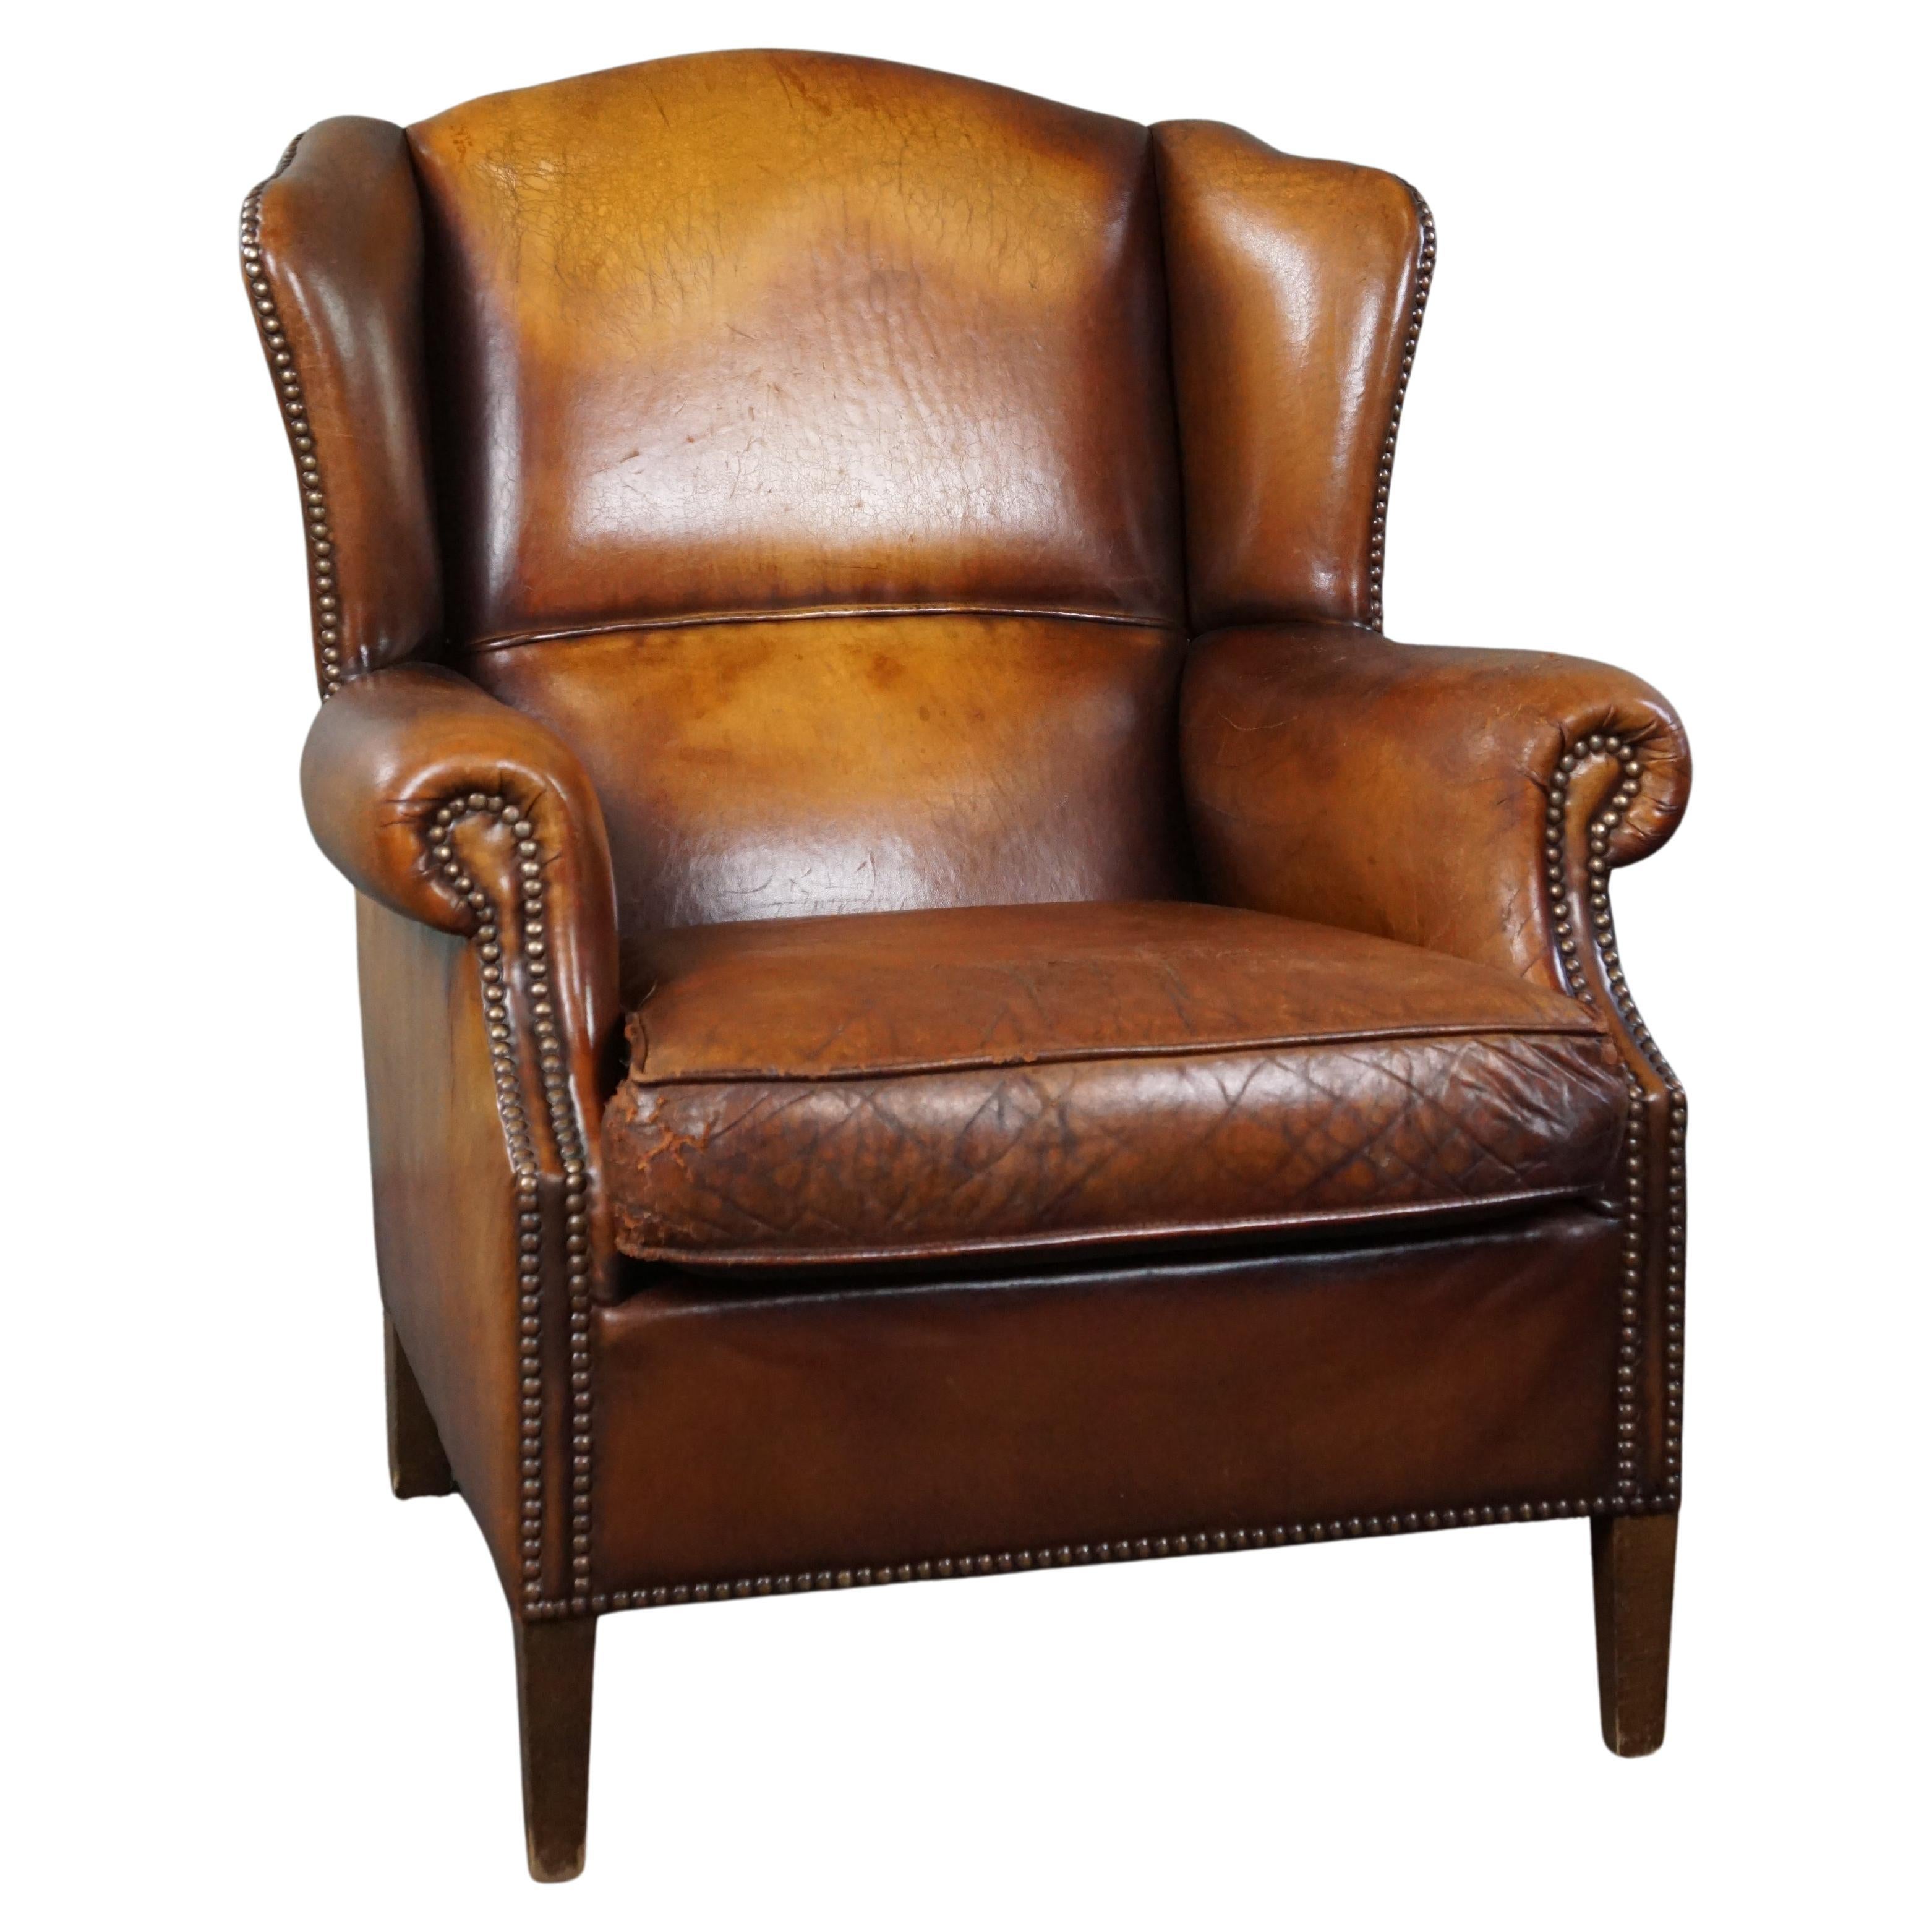 Sheep leather wingback chair with a beautiful patina For Sale